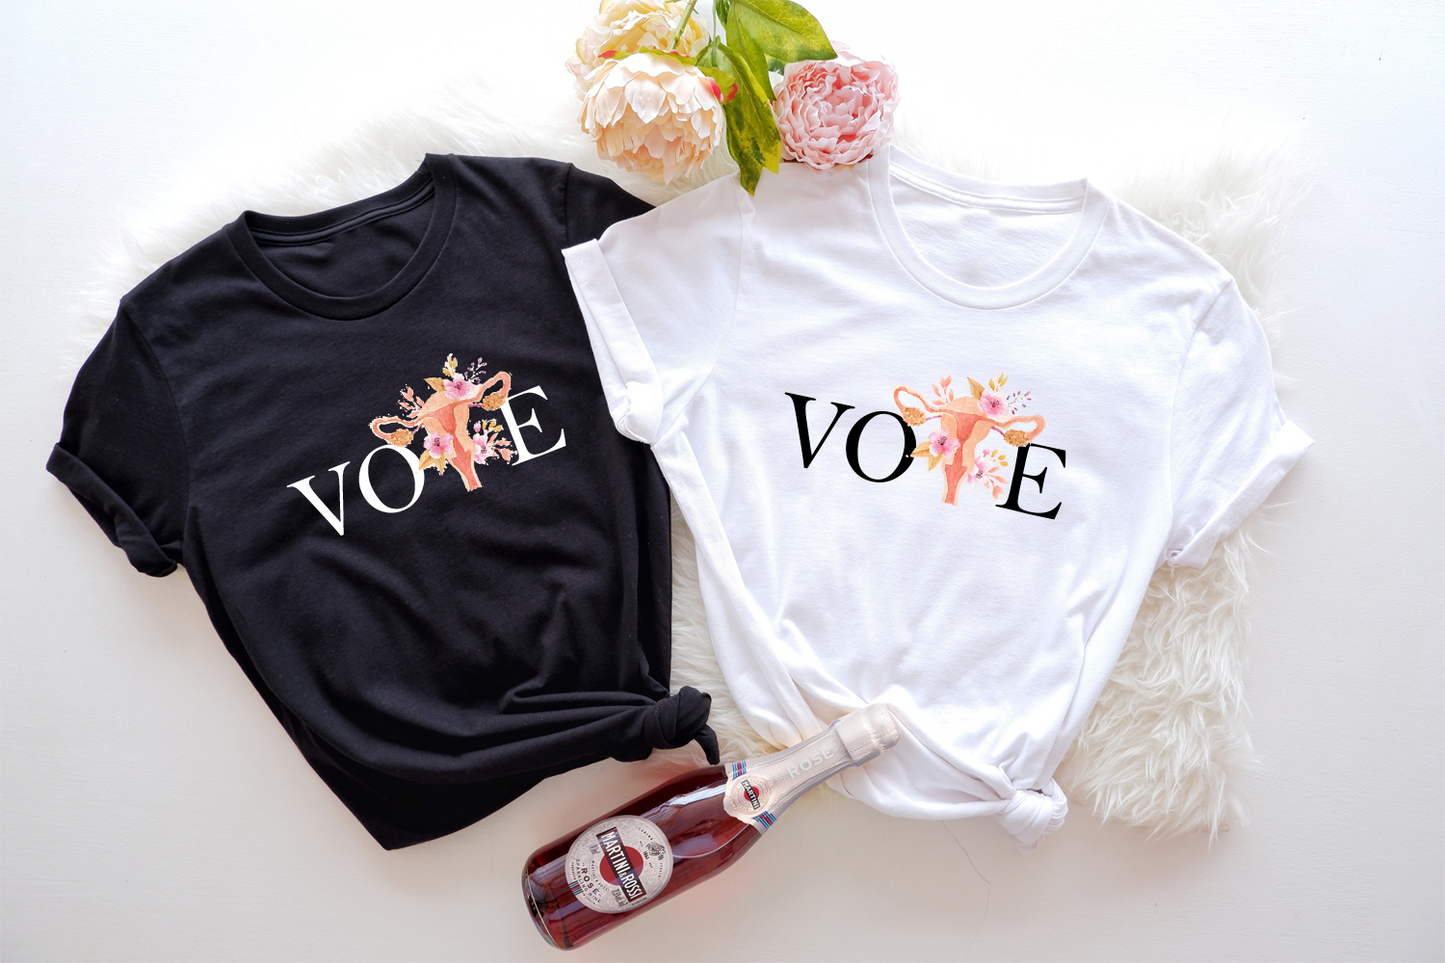 Protect your freedom to read and celebrate banned books with this unique Vote Shirt tee.